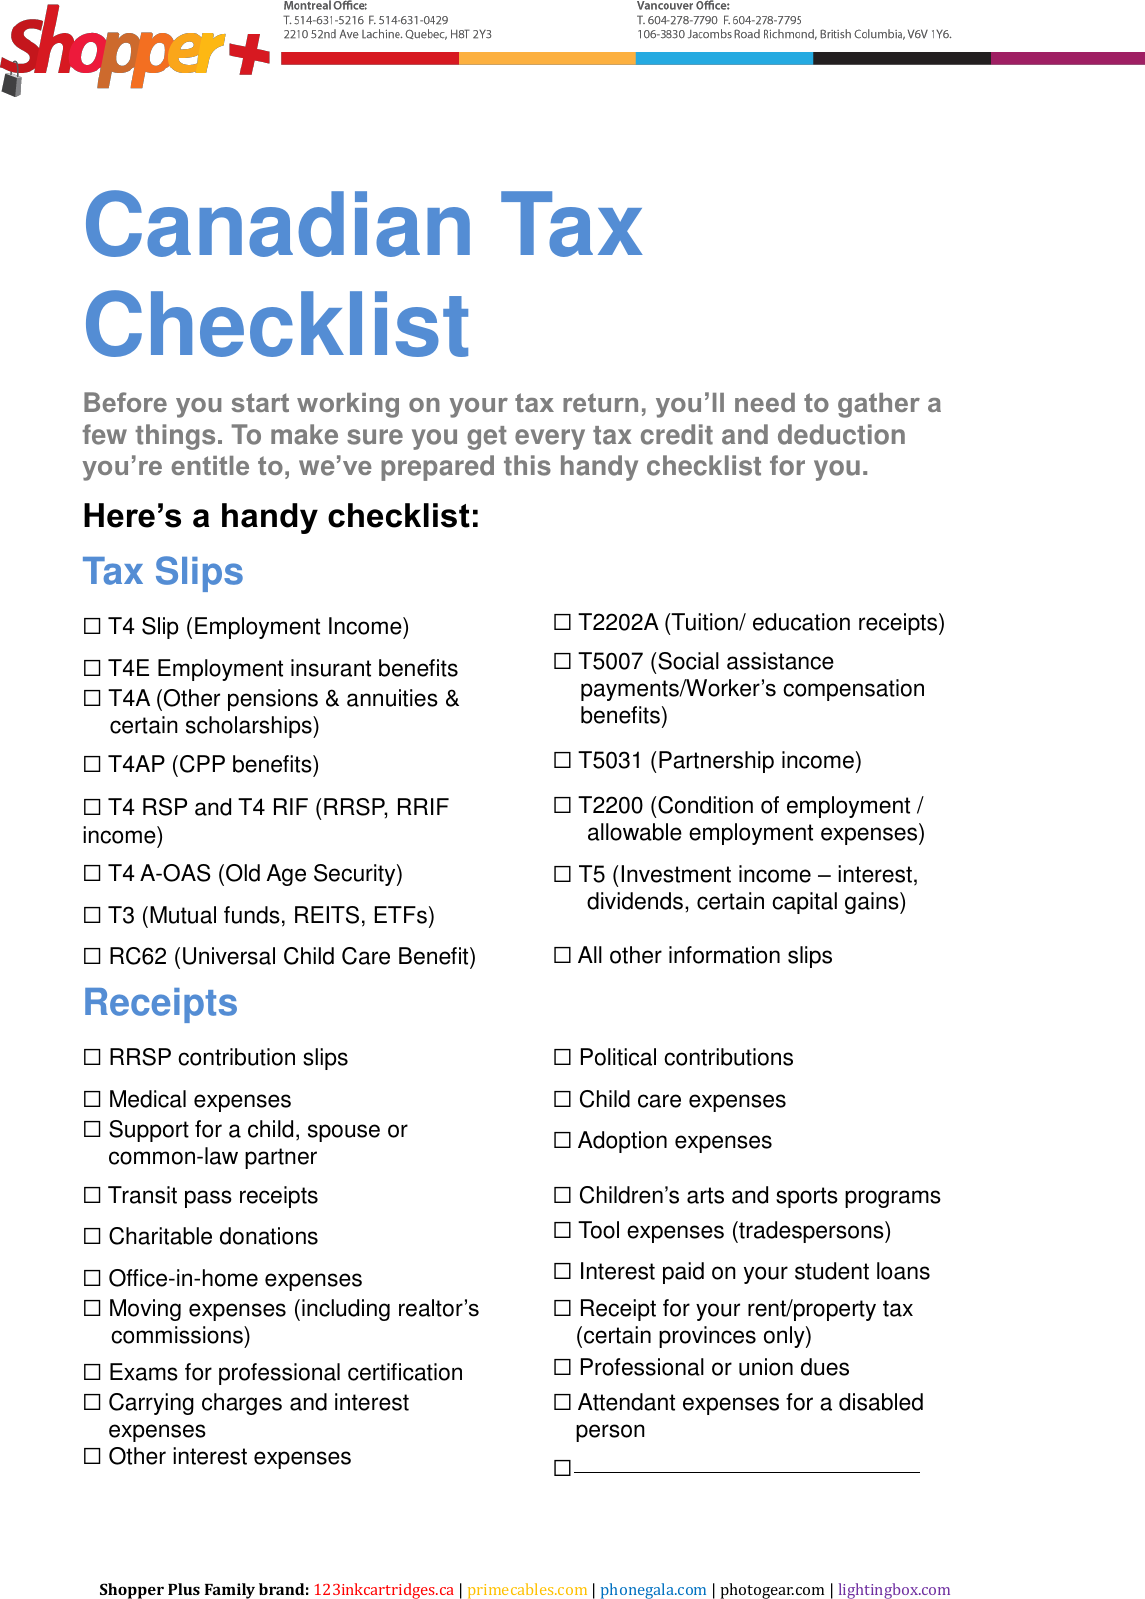 Page 1 of 2 - Printable Canadian Tax Checklist